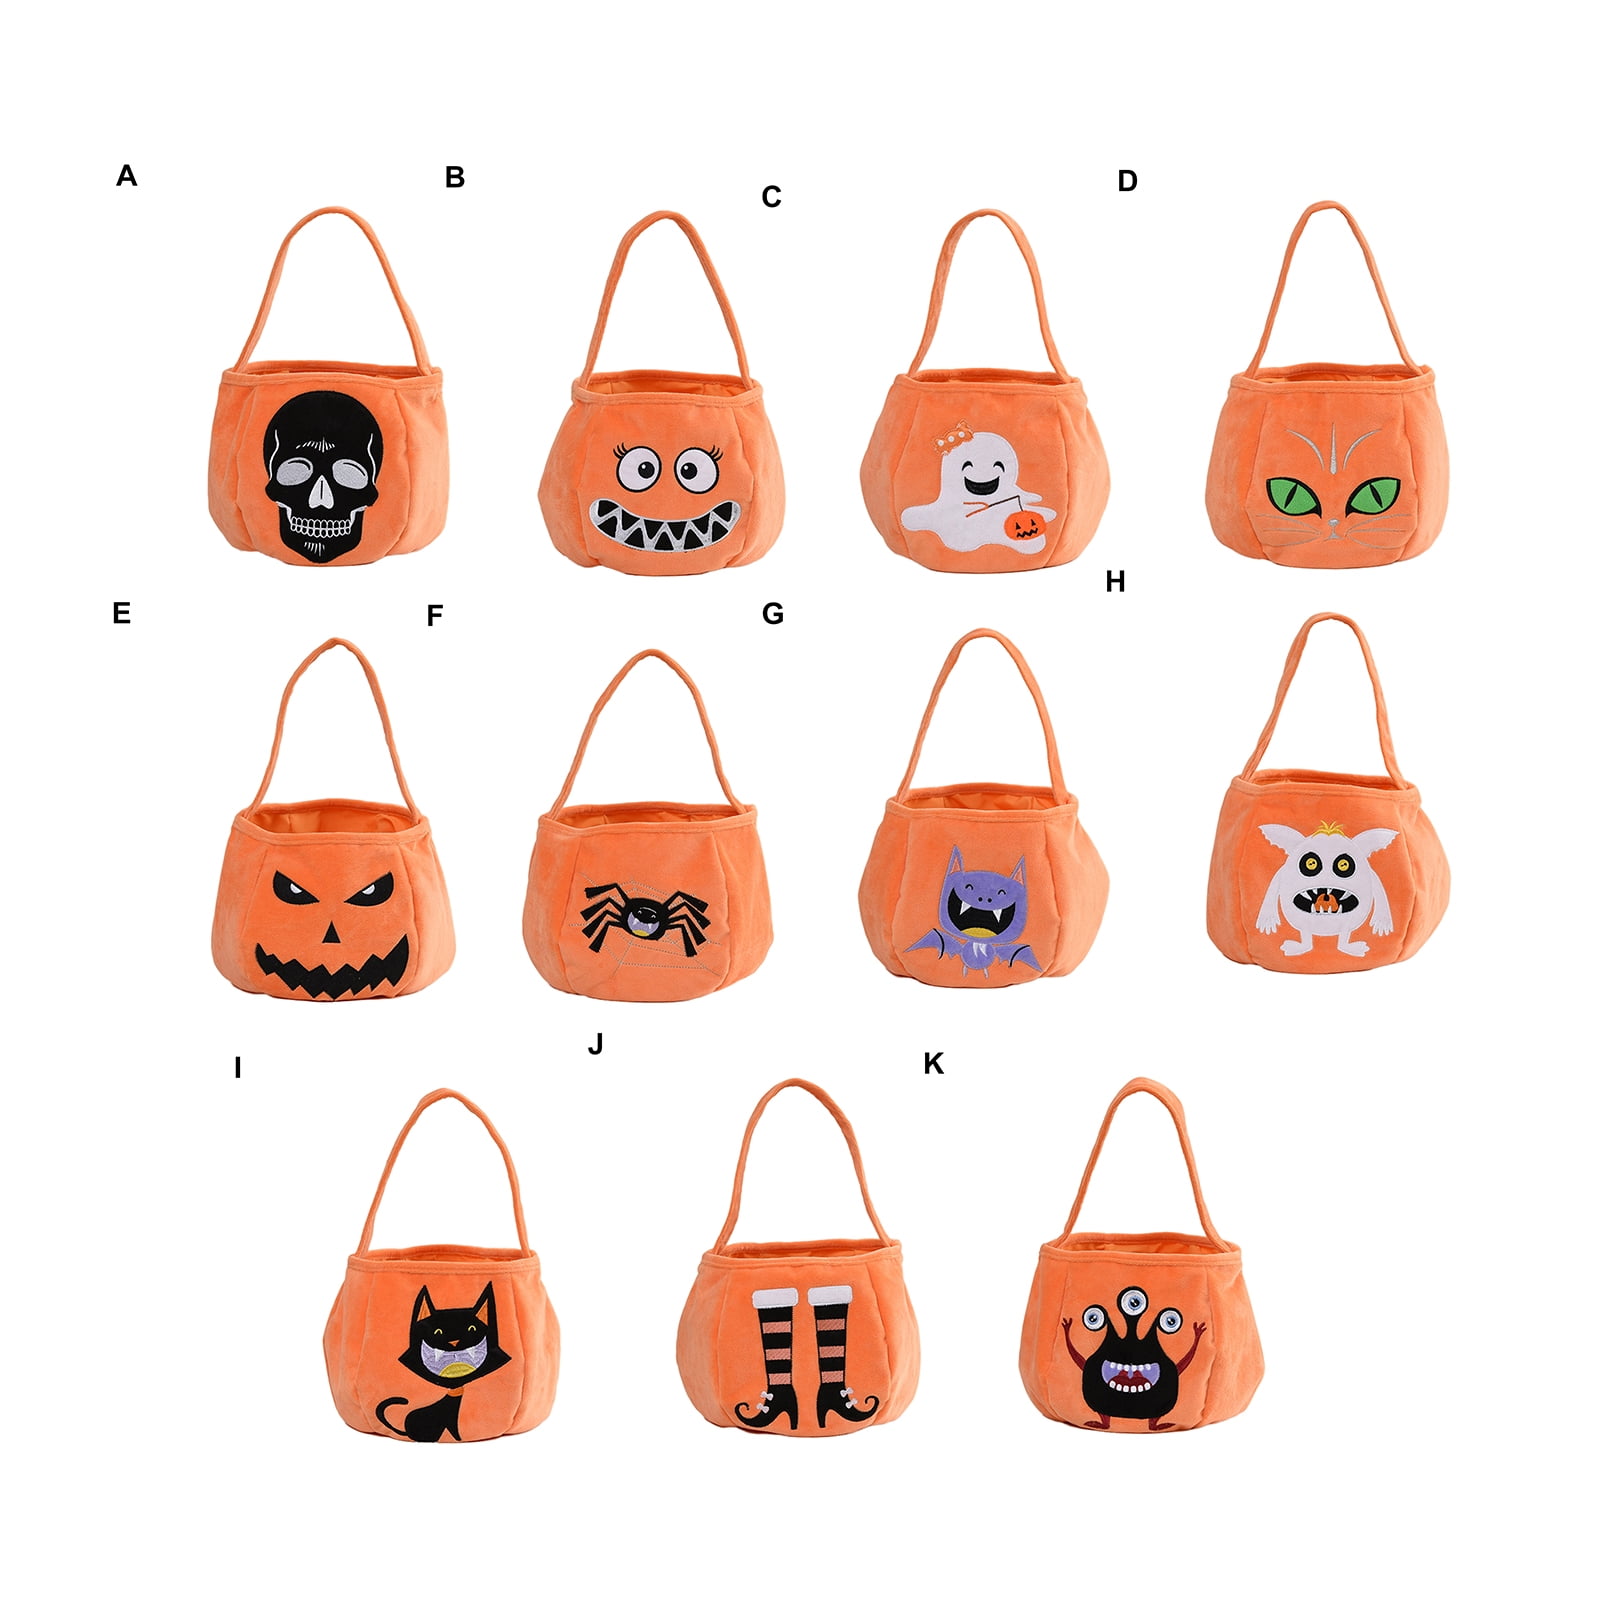 11pcs, Holiday Party Tote Bag, Halloween, Christmas, Gift Bag, Reusable  Transparent Tote Bag, Small Business Supplies, Cheapest Items Available